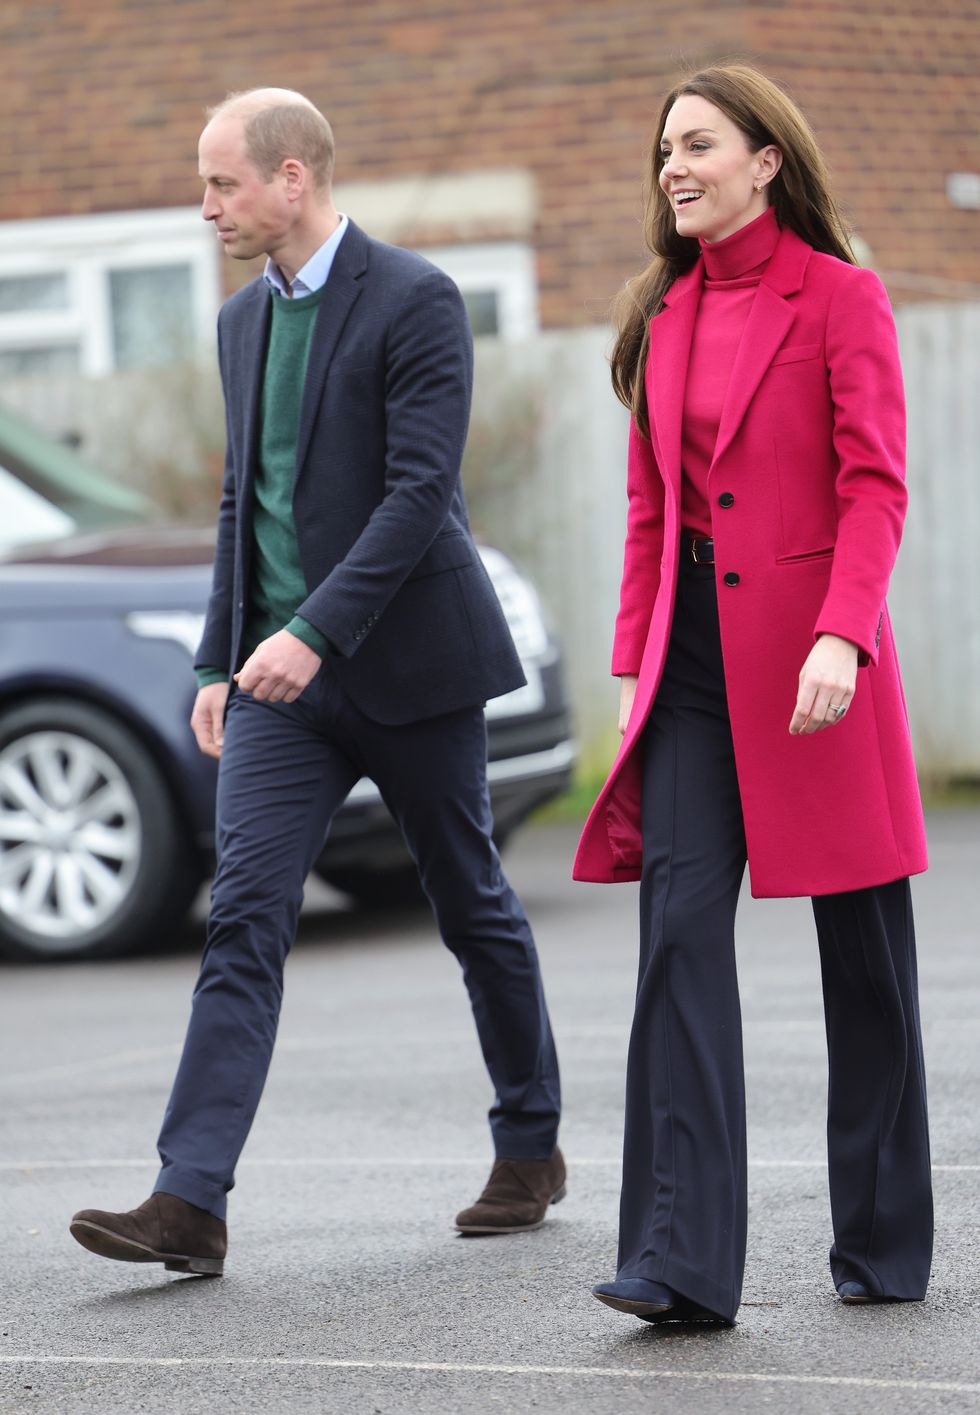 windsor, england january 26 prince william, prince of wales and catherine, princess of wales arrive for their visit to windsor foodshare on january 26, 2023 in windsor, england the prince and princess of wales visited the charity to learn about their work providing food parcels to those who are struggling financially photo by chris jacksongetty images